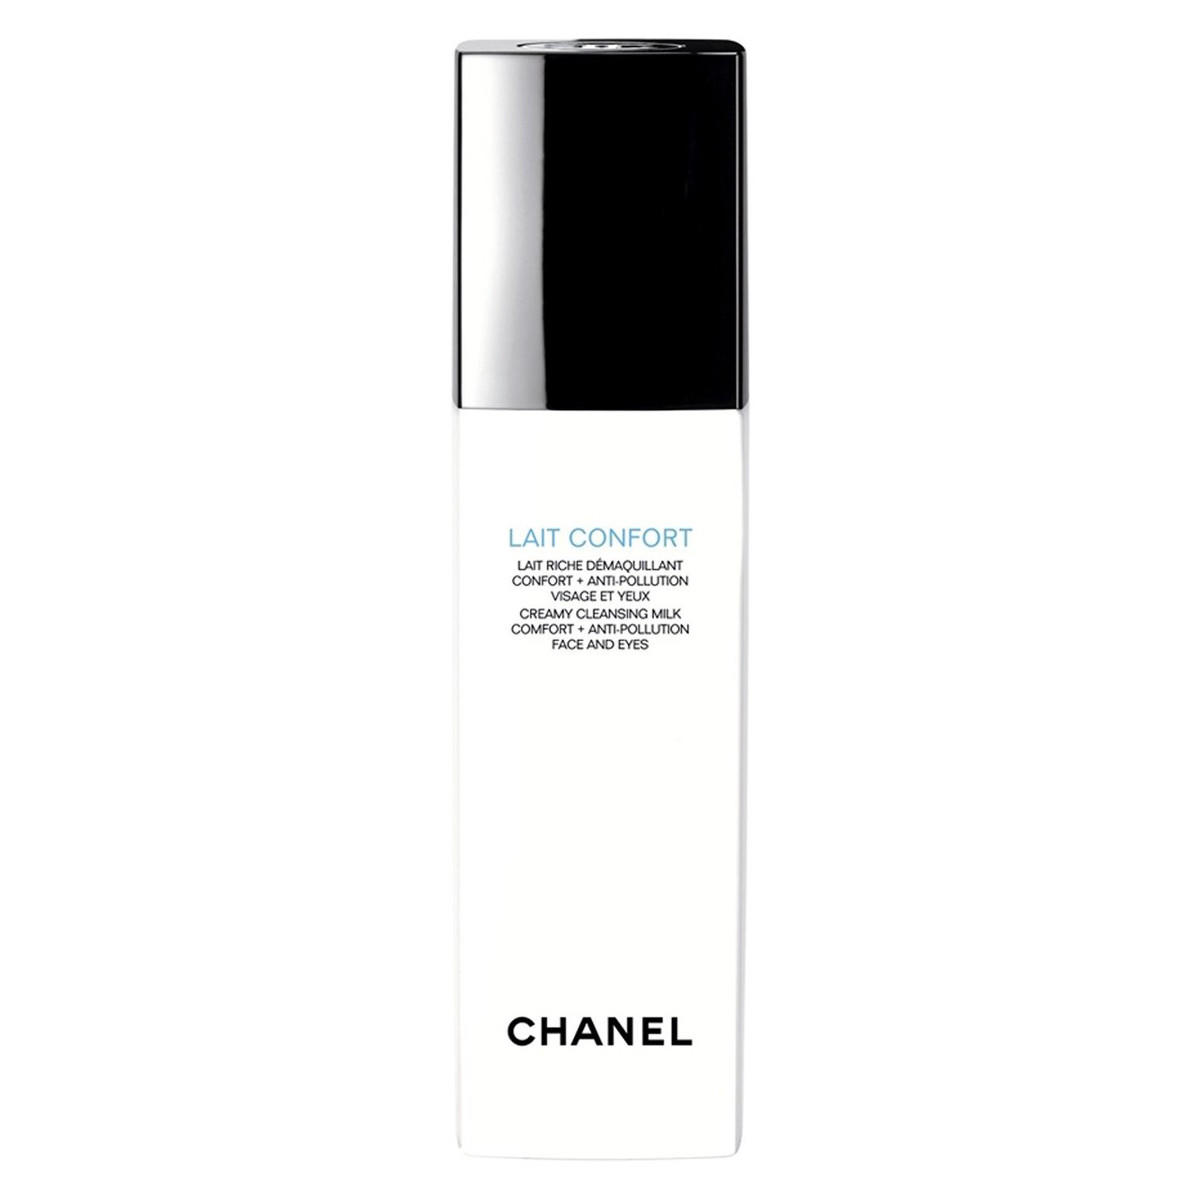 Chanel Lait Confort Creamy Cleansing Milk Comfort + Anti-Pollution Face & Eyes